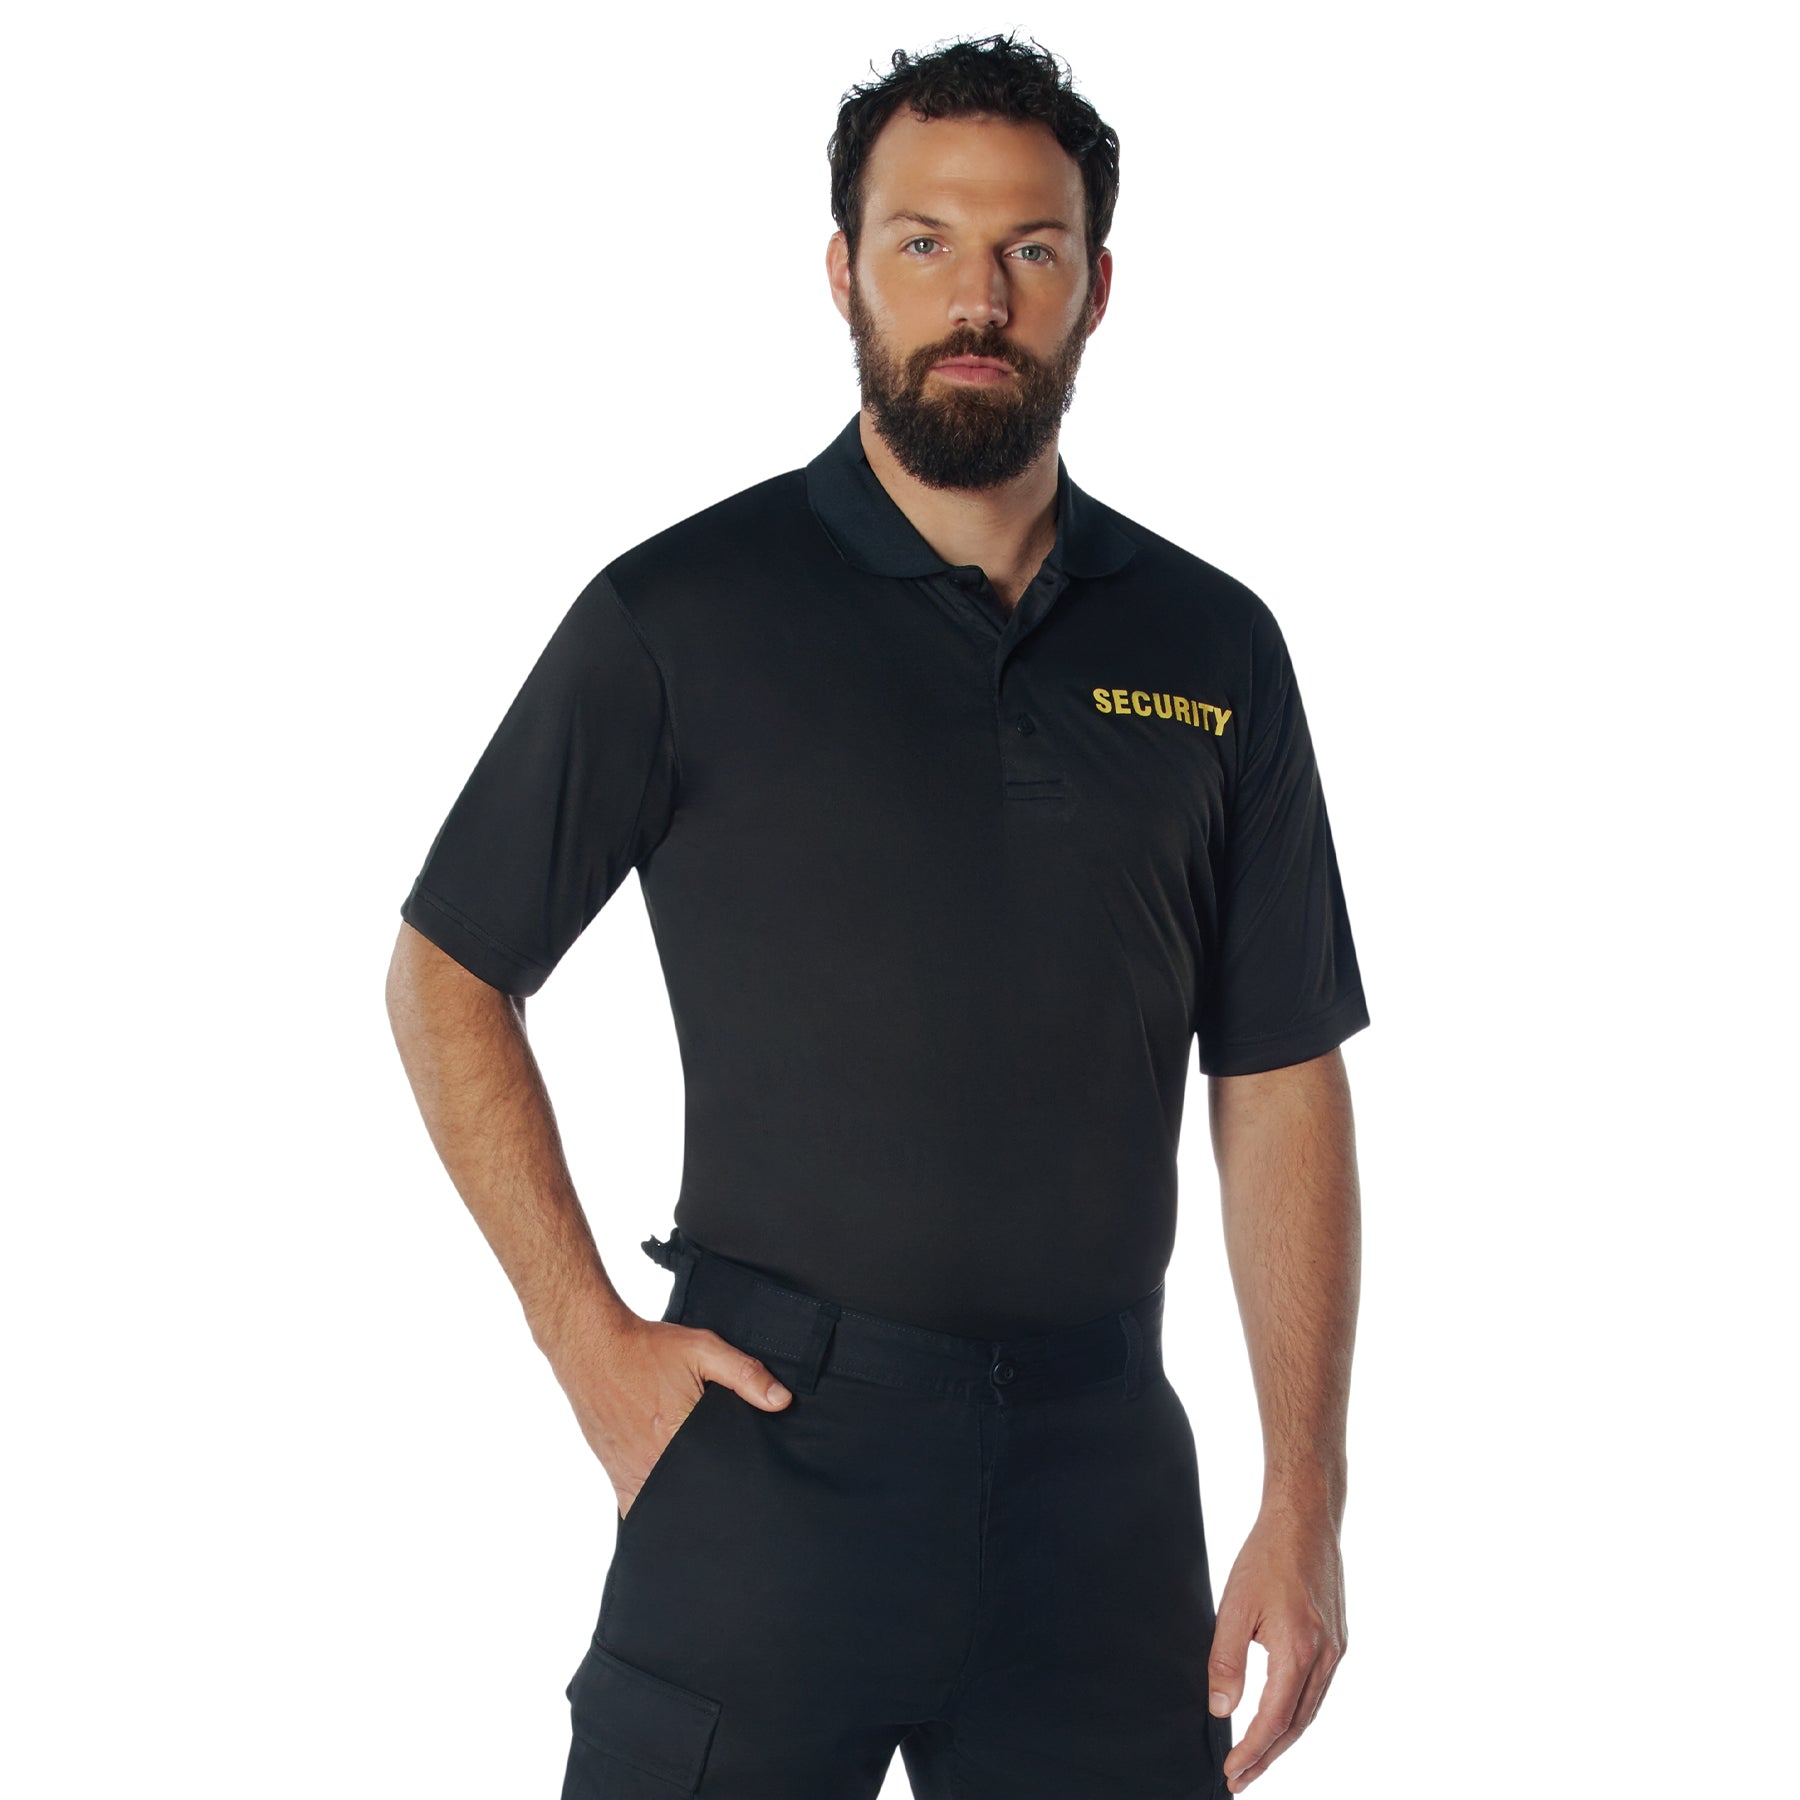 [Public Safety] Poly Moisture Wicking Security Polo T-Shirts Security Yellow - Black